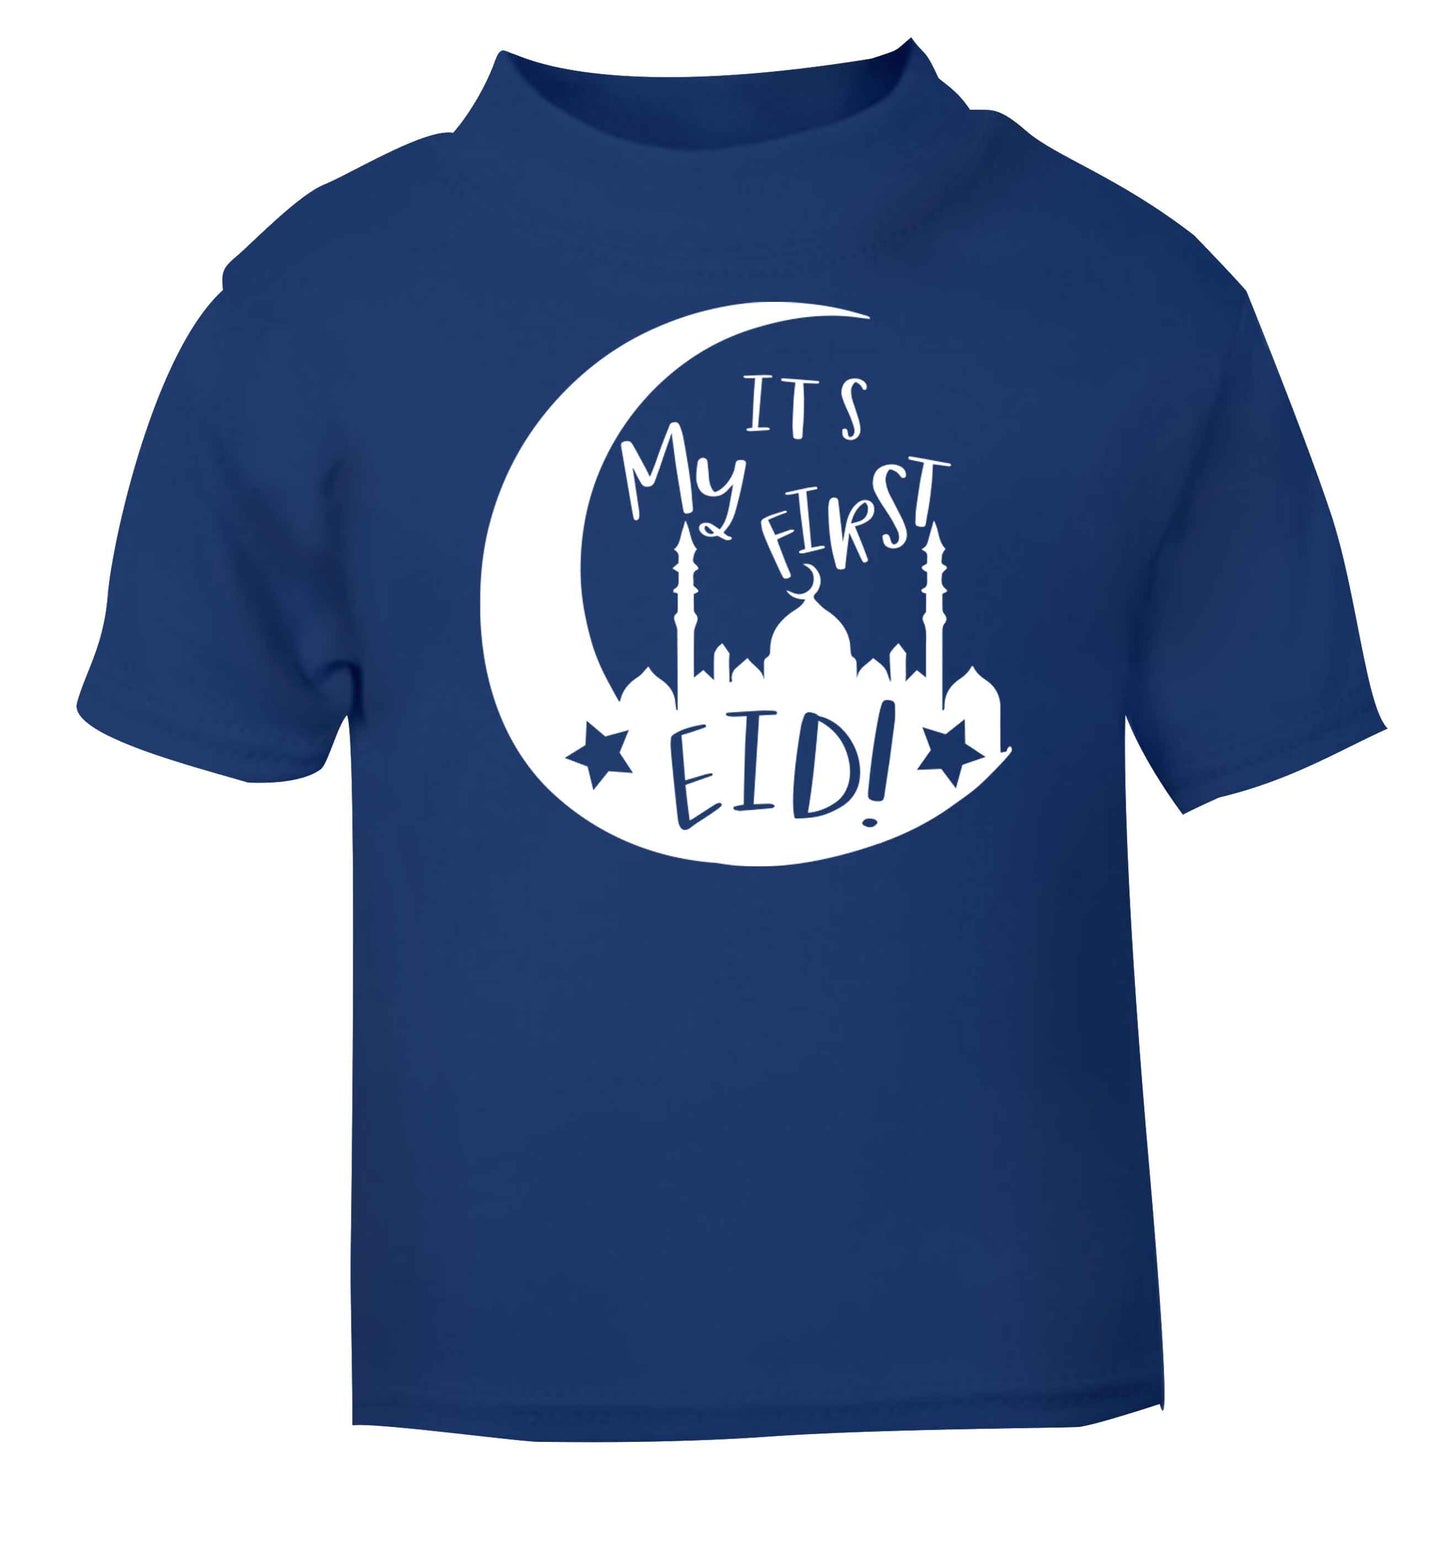 It's my first Eid moon blue baby toddler Tshirt 2 Years